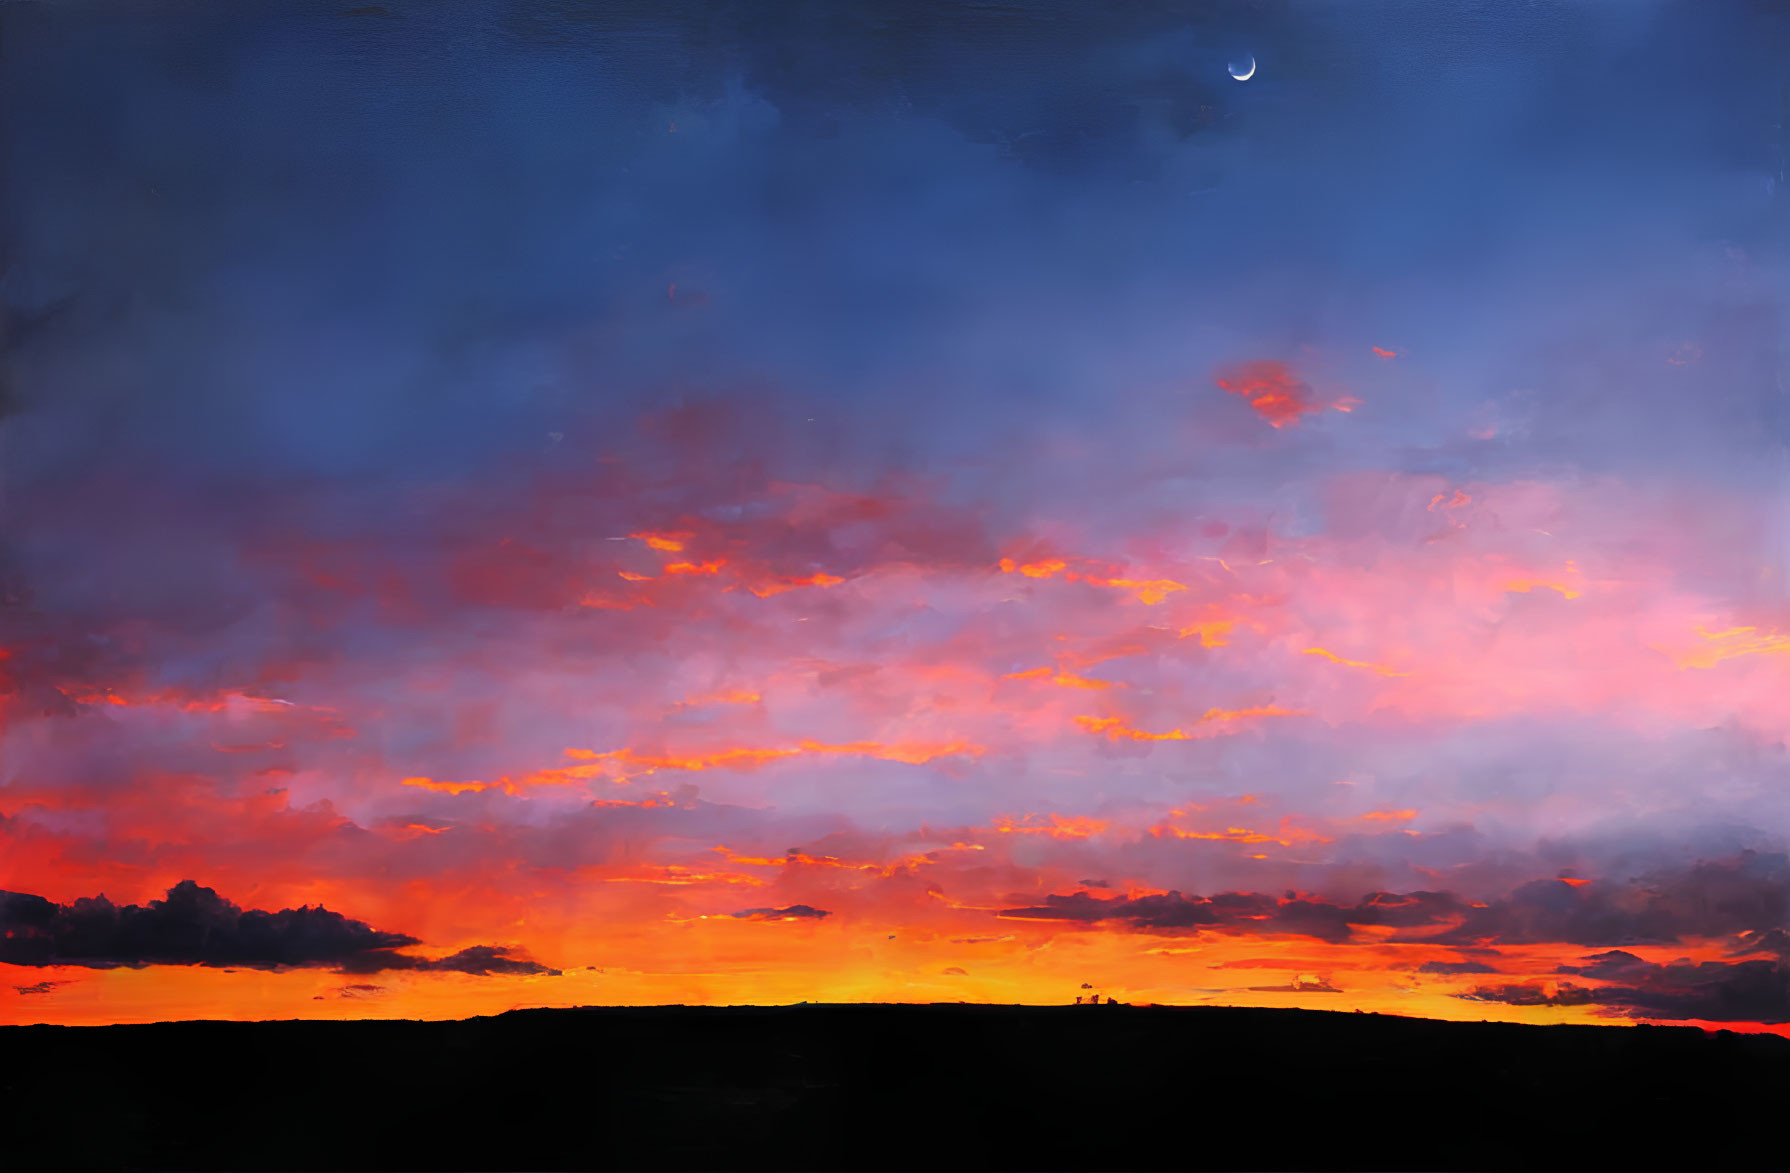 Vivid sunset painting with fiery clouds, blue sky, silhouetted land, and crescent